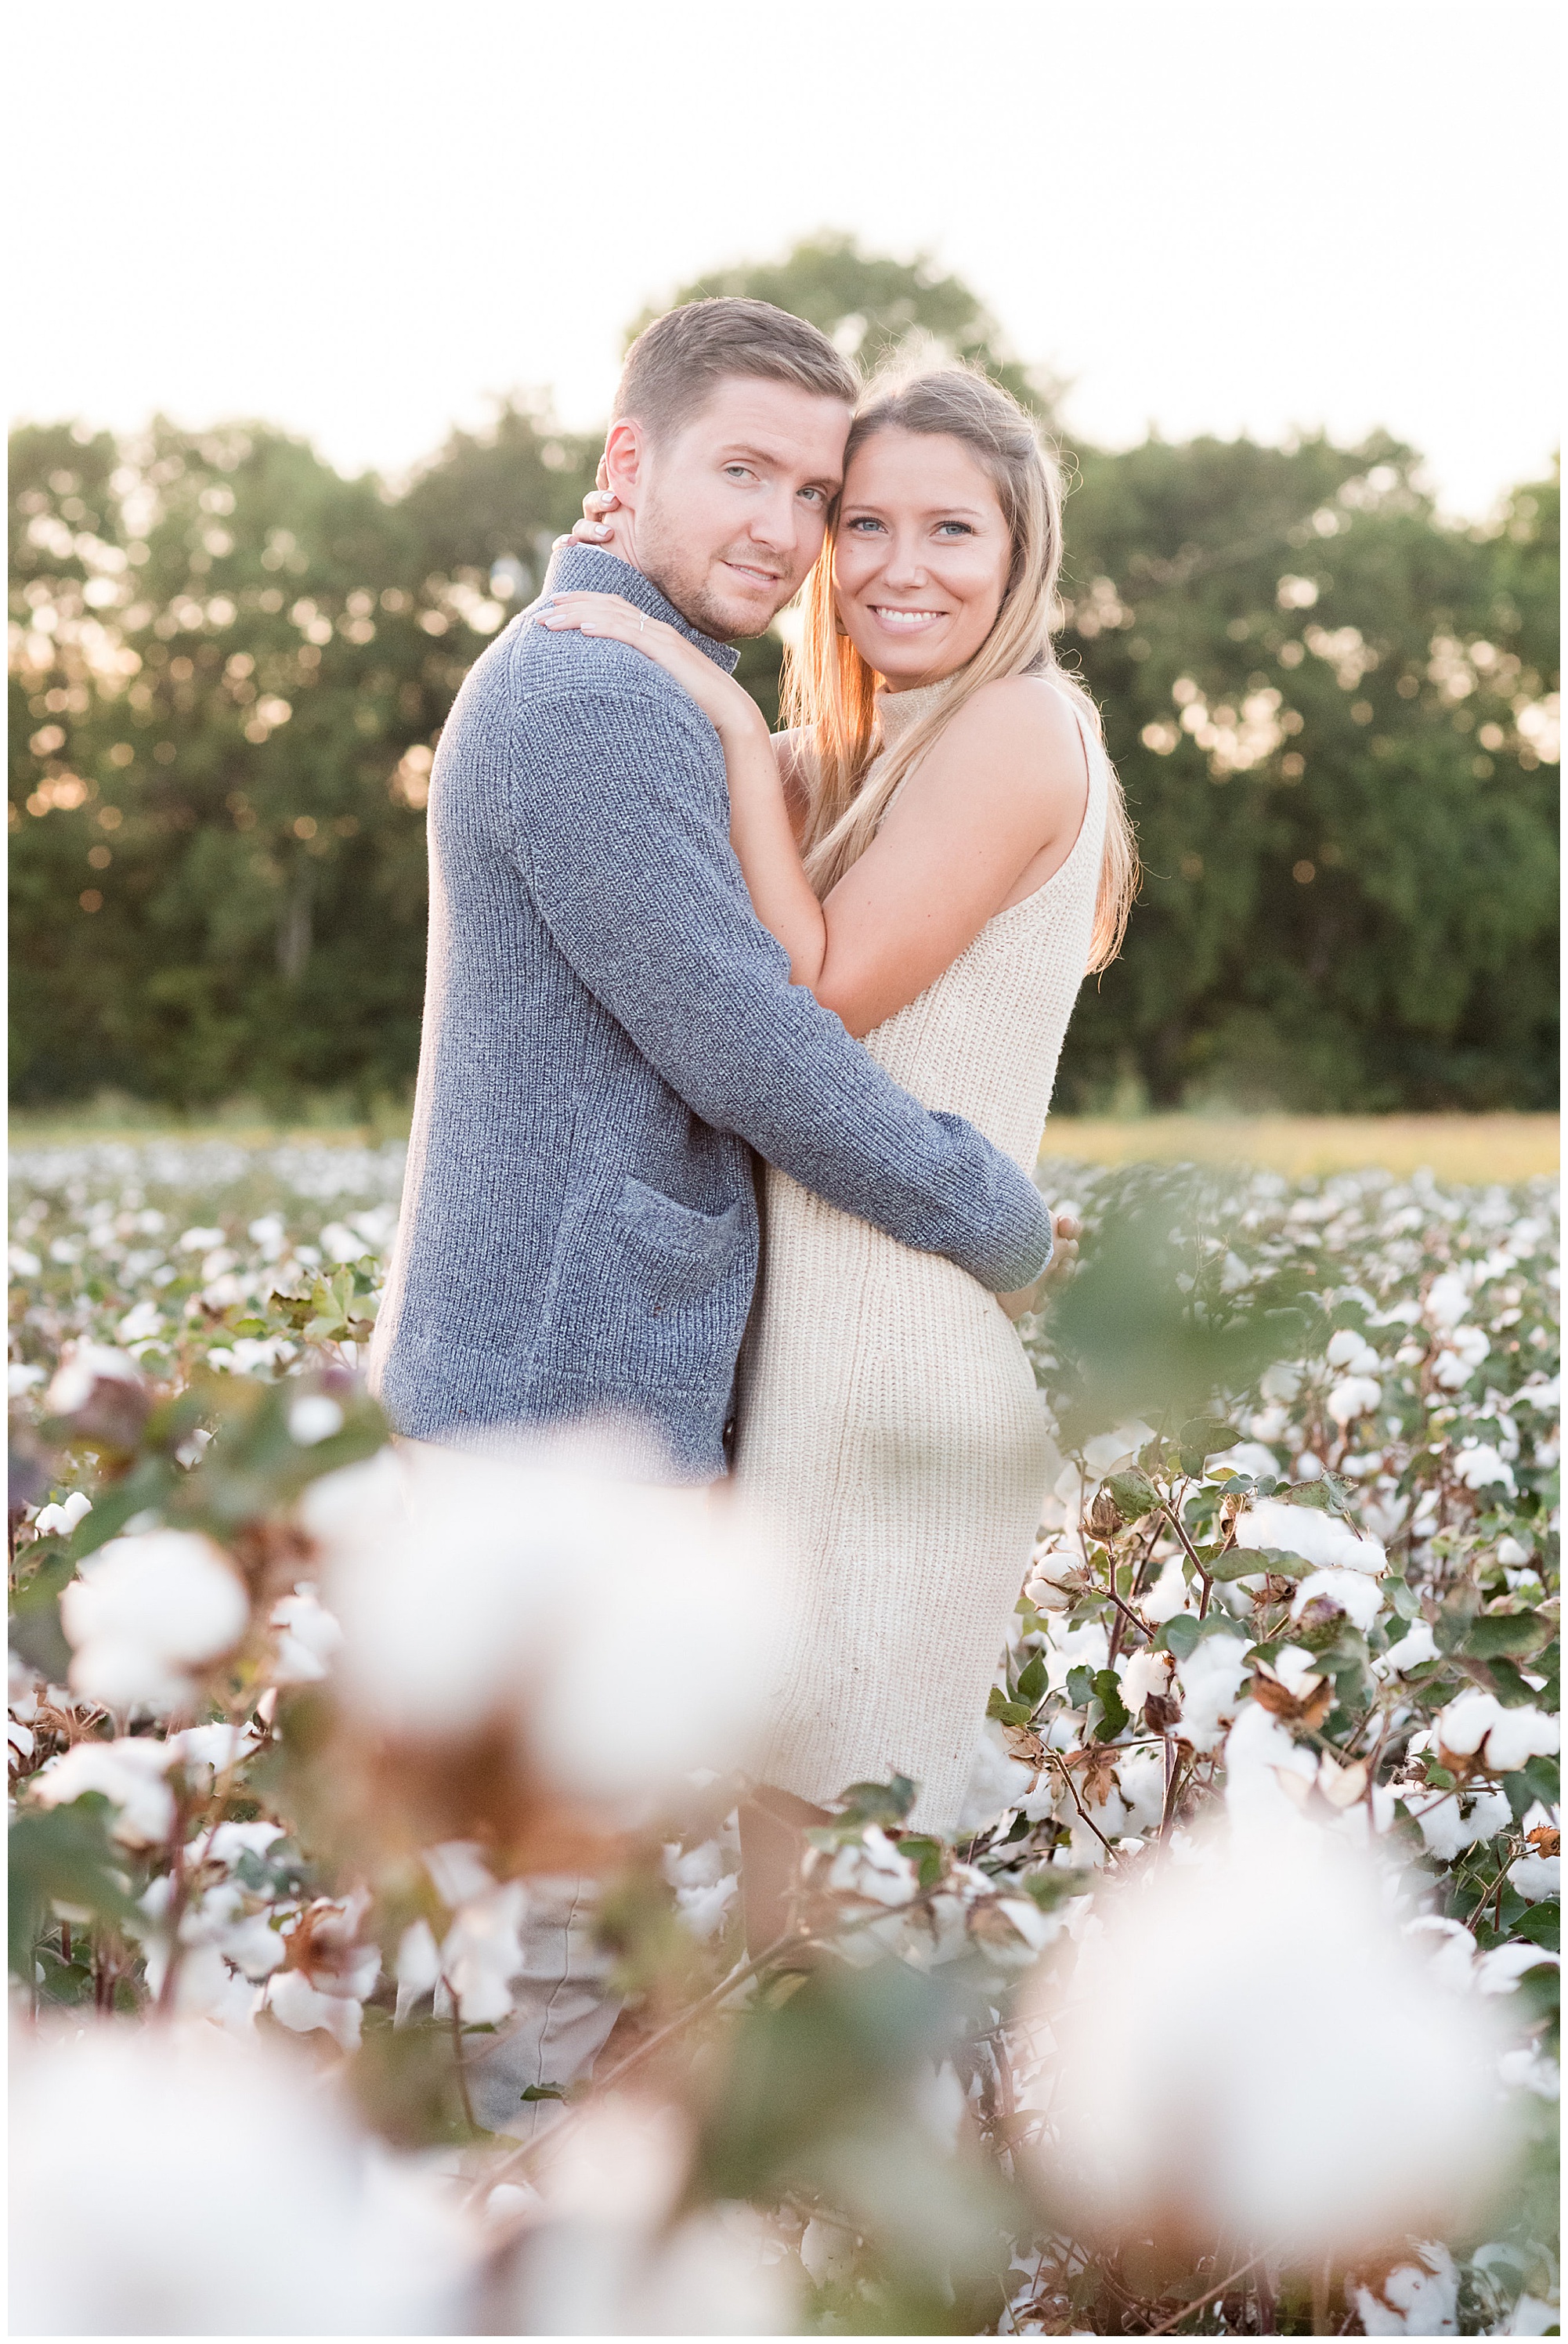 cotton field engagement session at shirley plantation near upper shirley vineyards. in the fall. in october. by richmond rva wedding photographer, sarah & dave photography